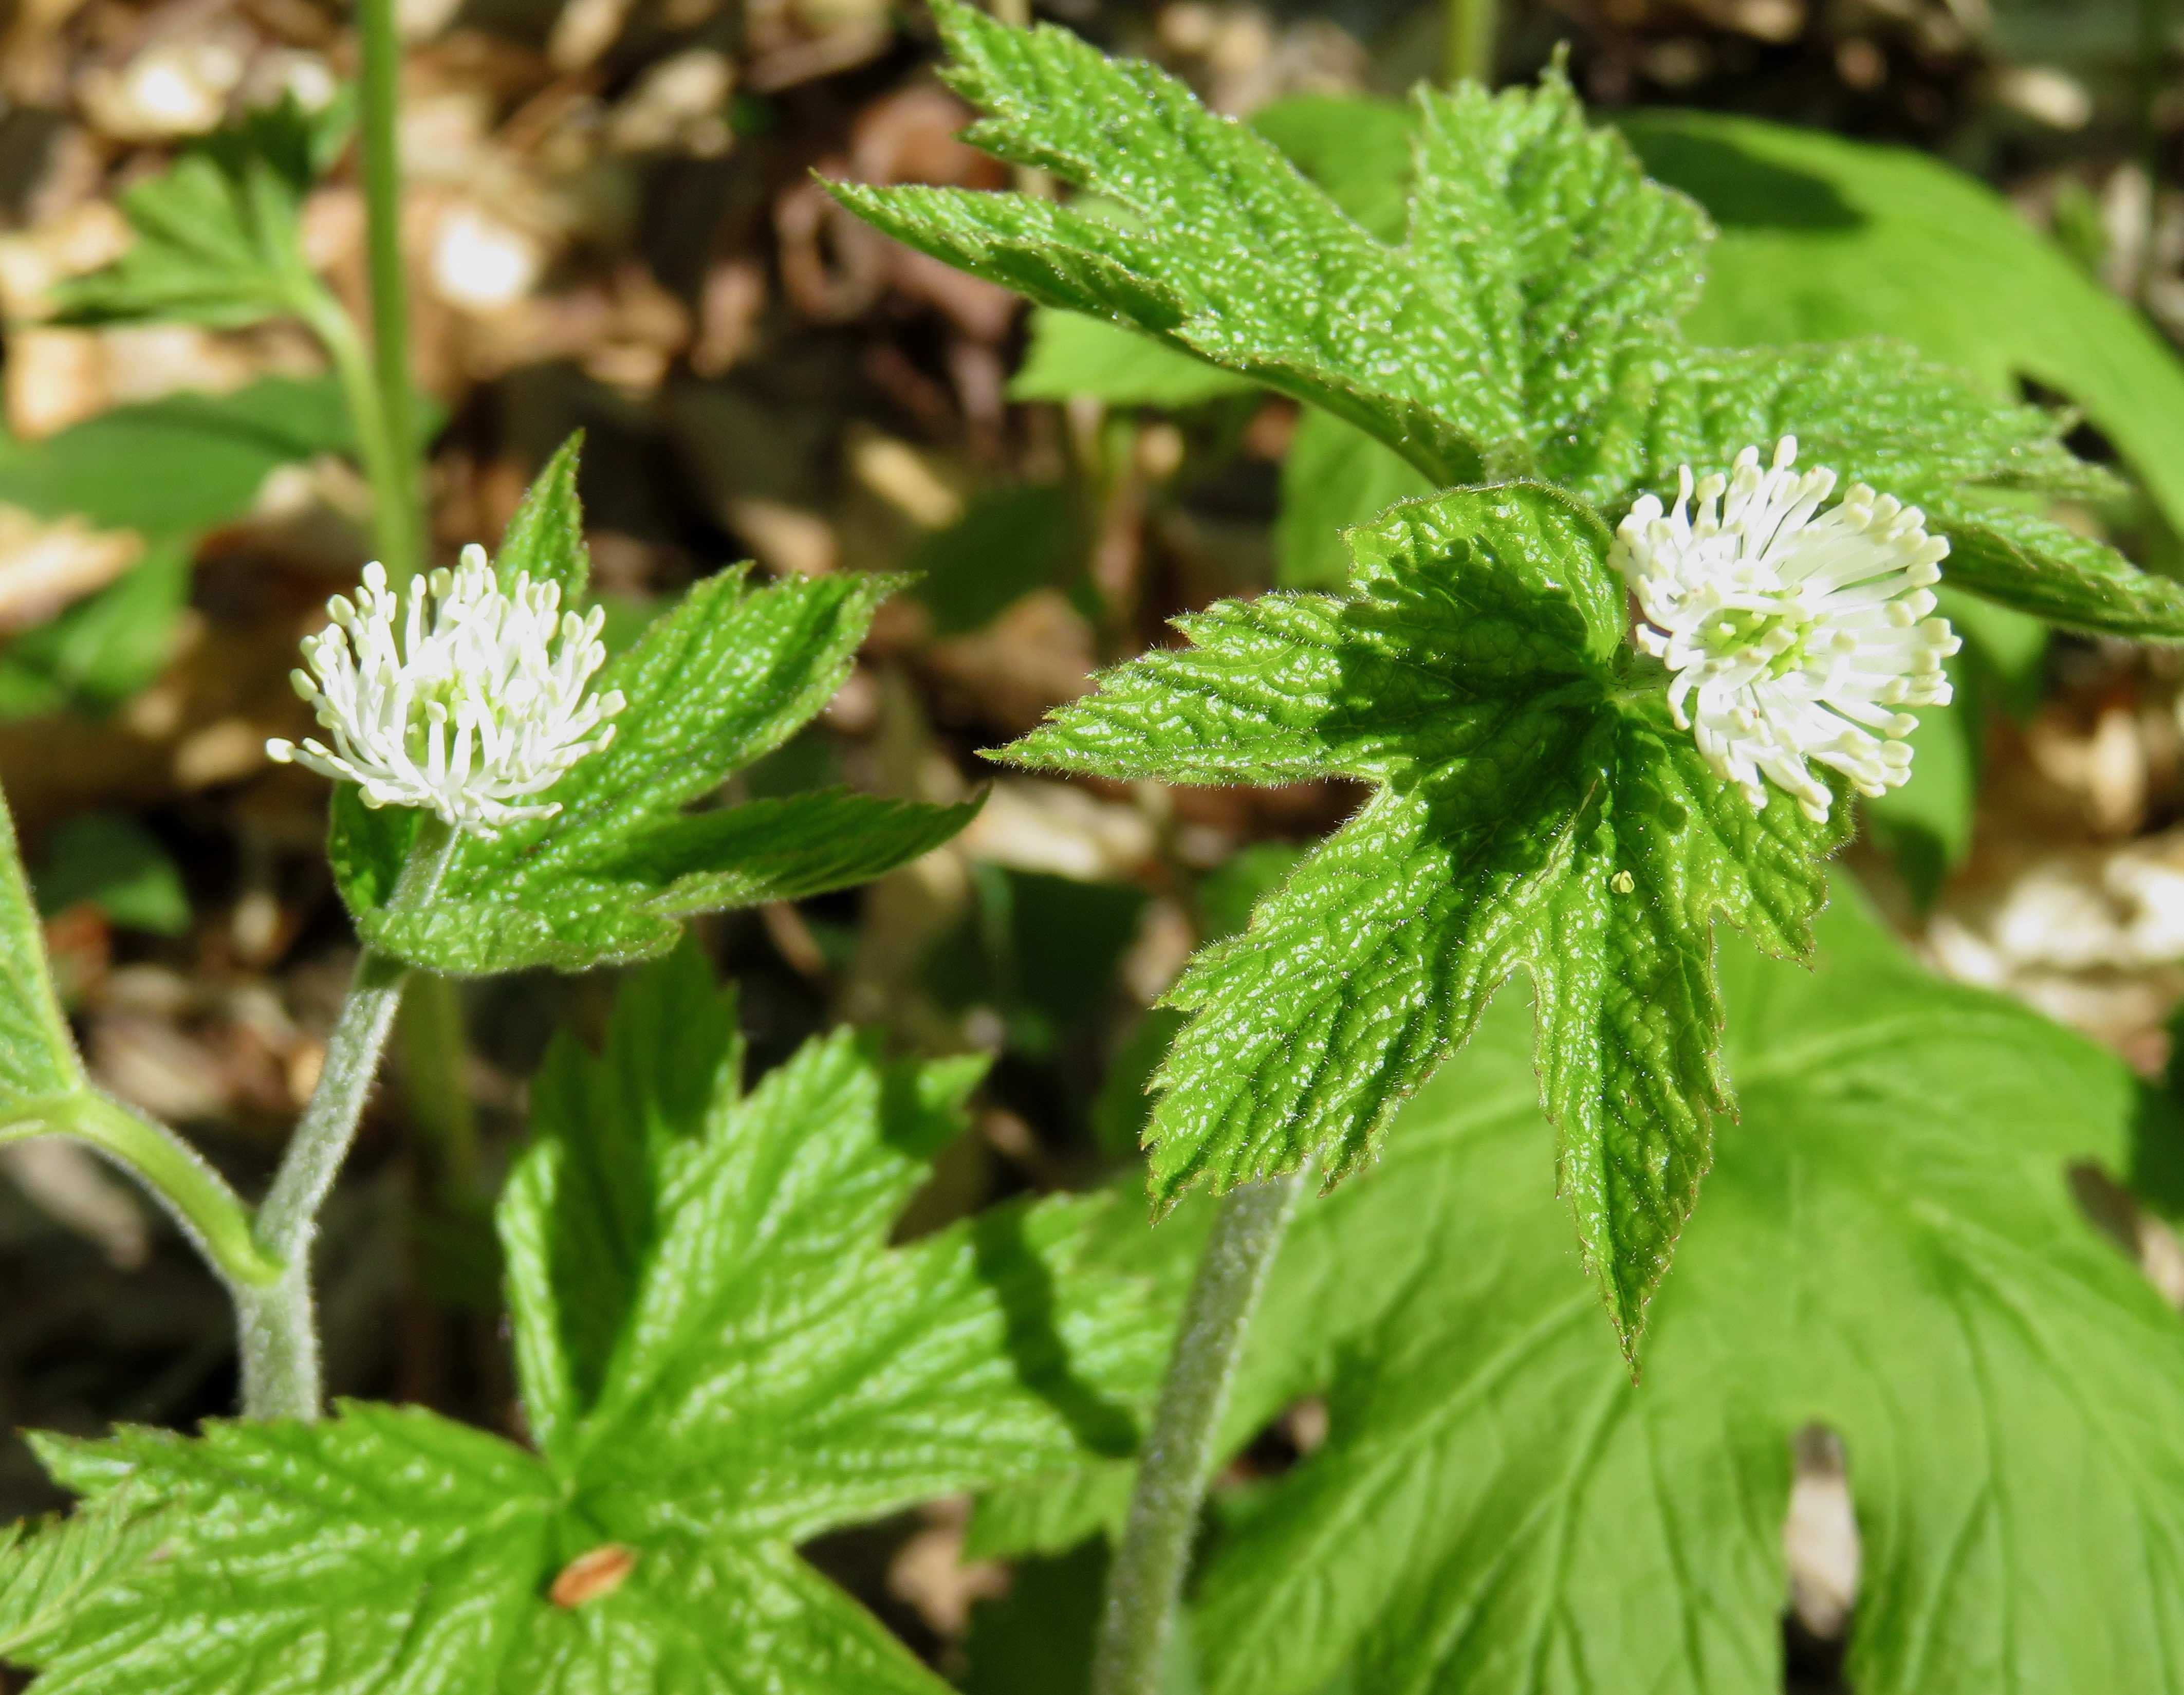 The Scientific Name is Hydrastis canadensis. You will likely hear them called Goldenseal. This picture shows the Showy white stamens surround green ovaries (no petals); leaves are palmate of Hydrastis canadensis